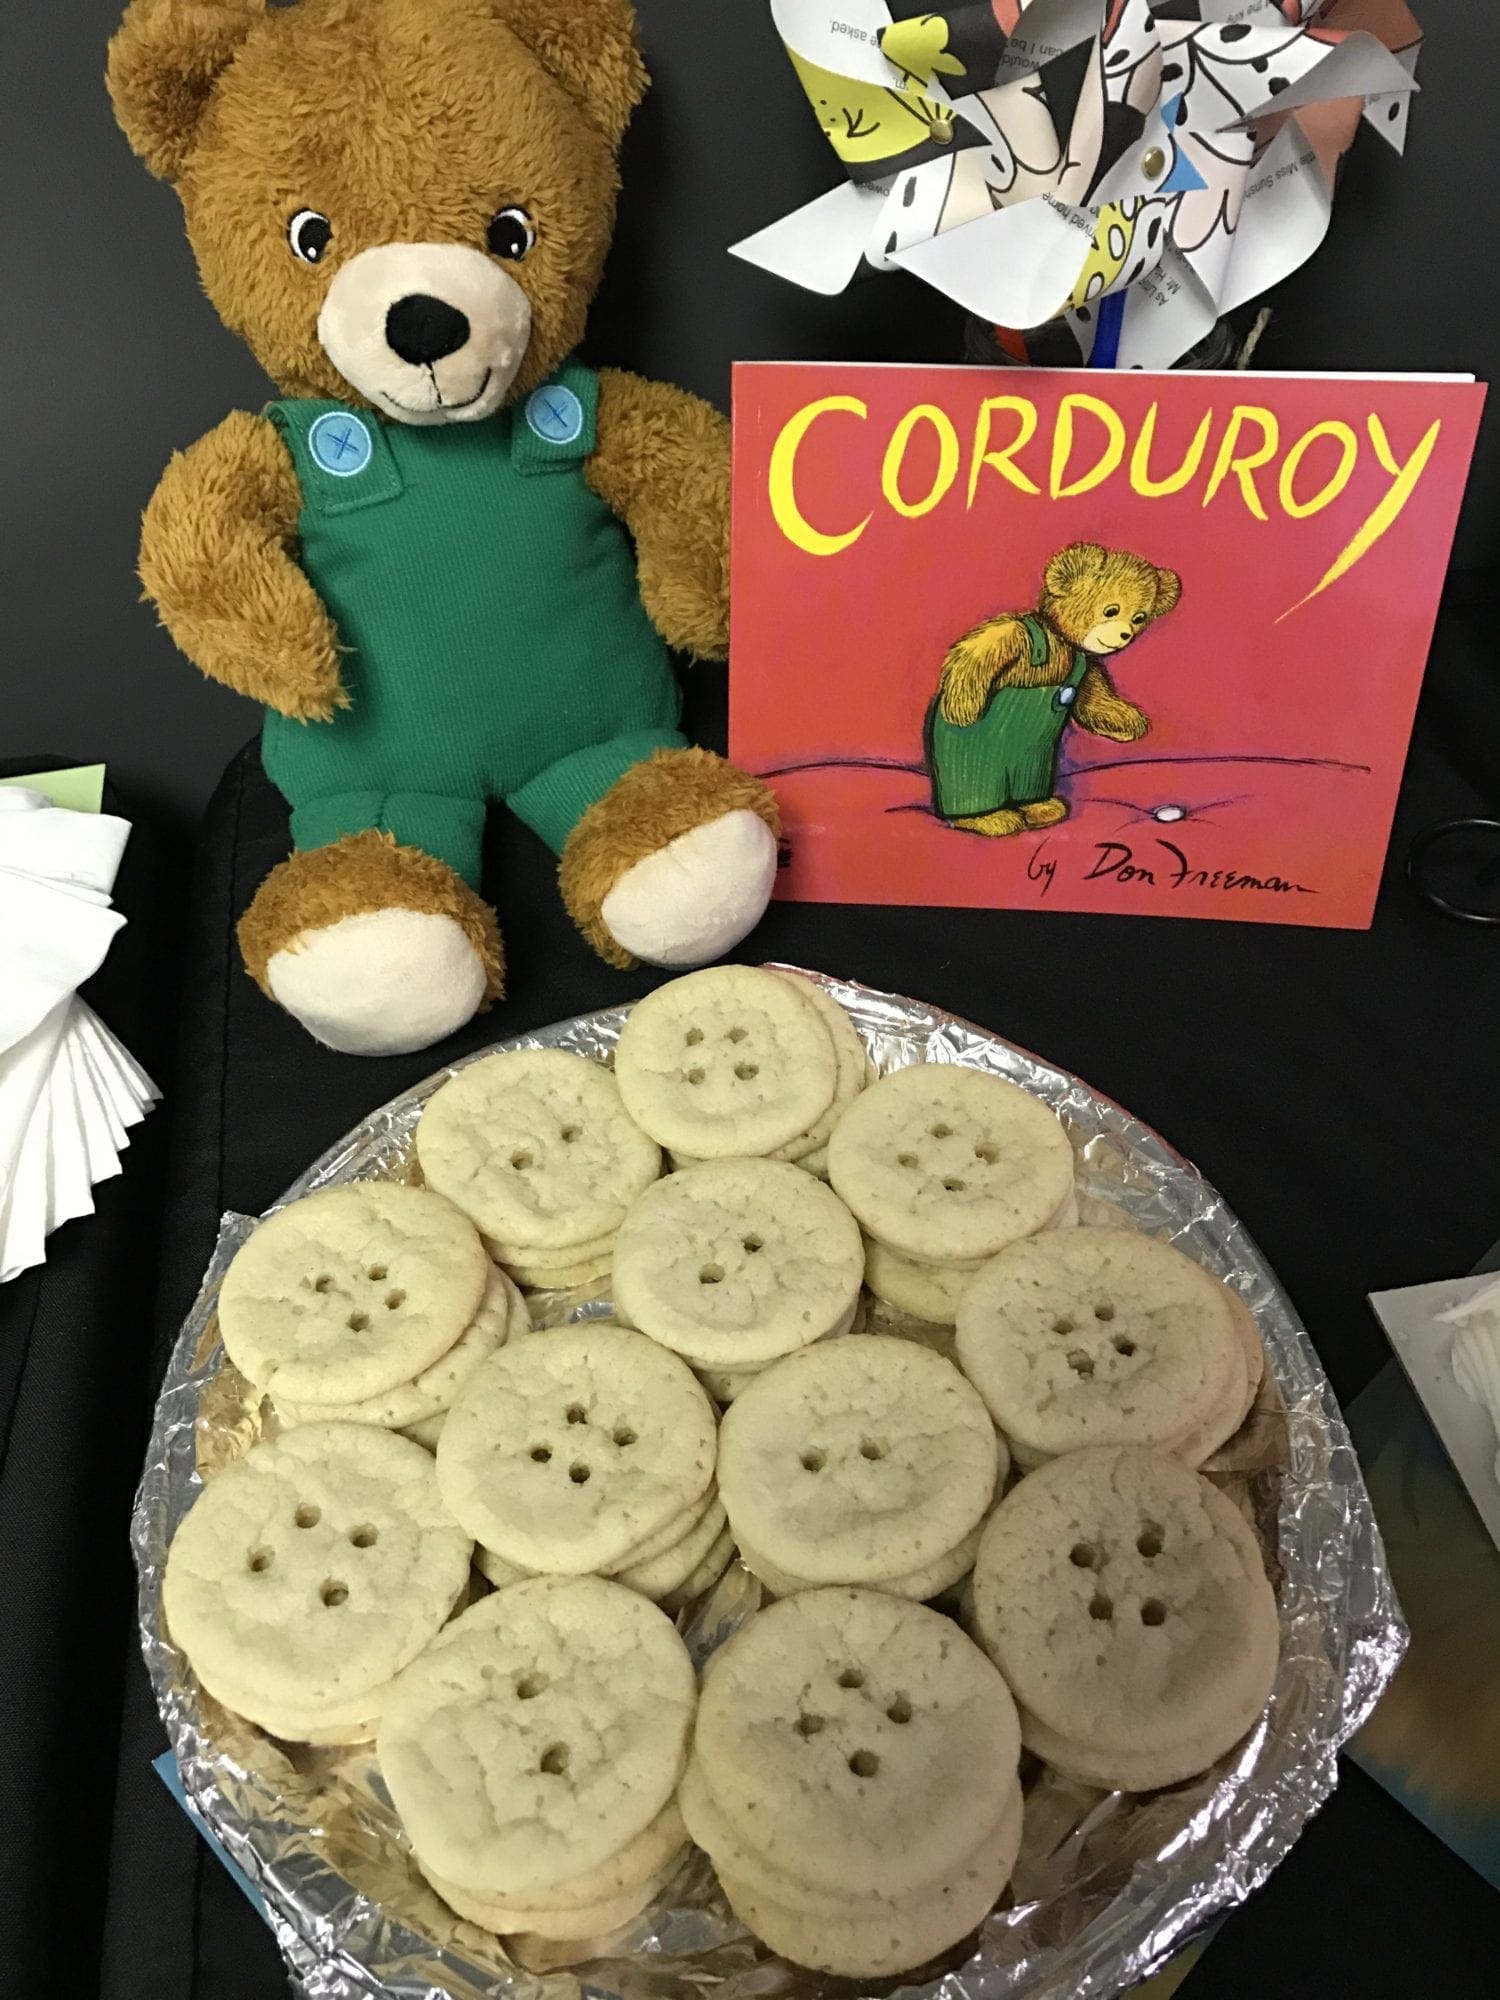 Snack idea to go with the Corduroy children's book